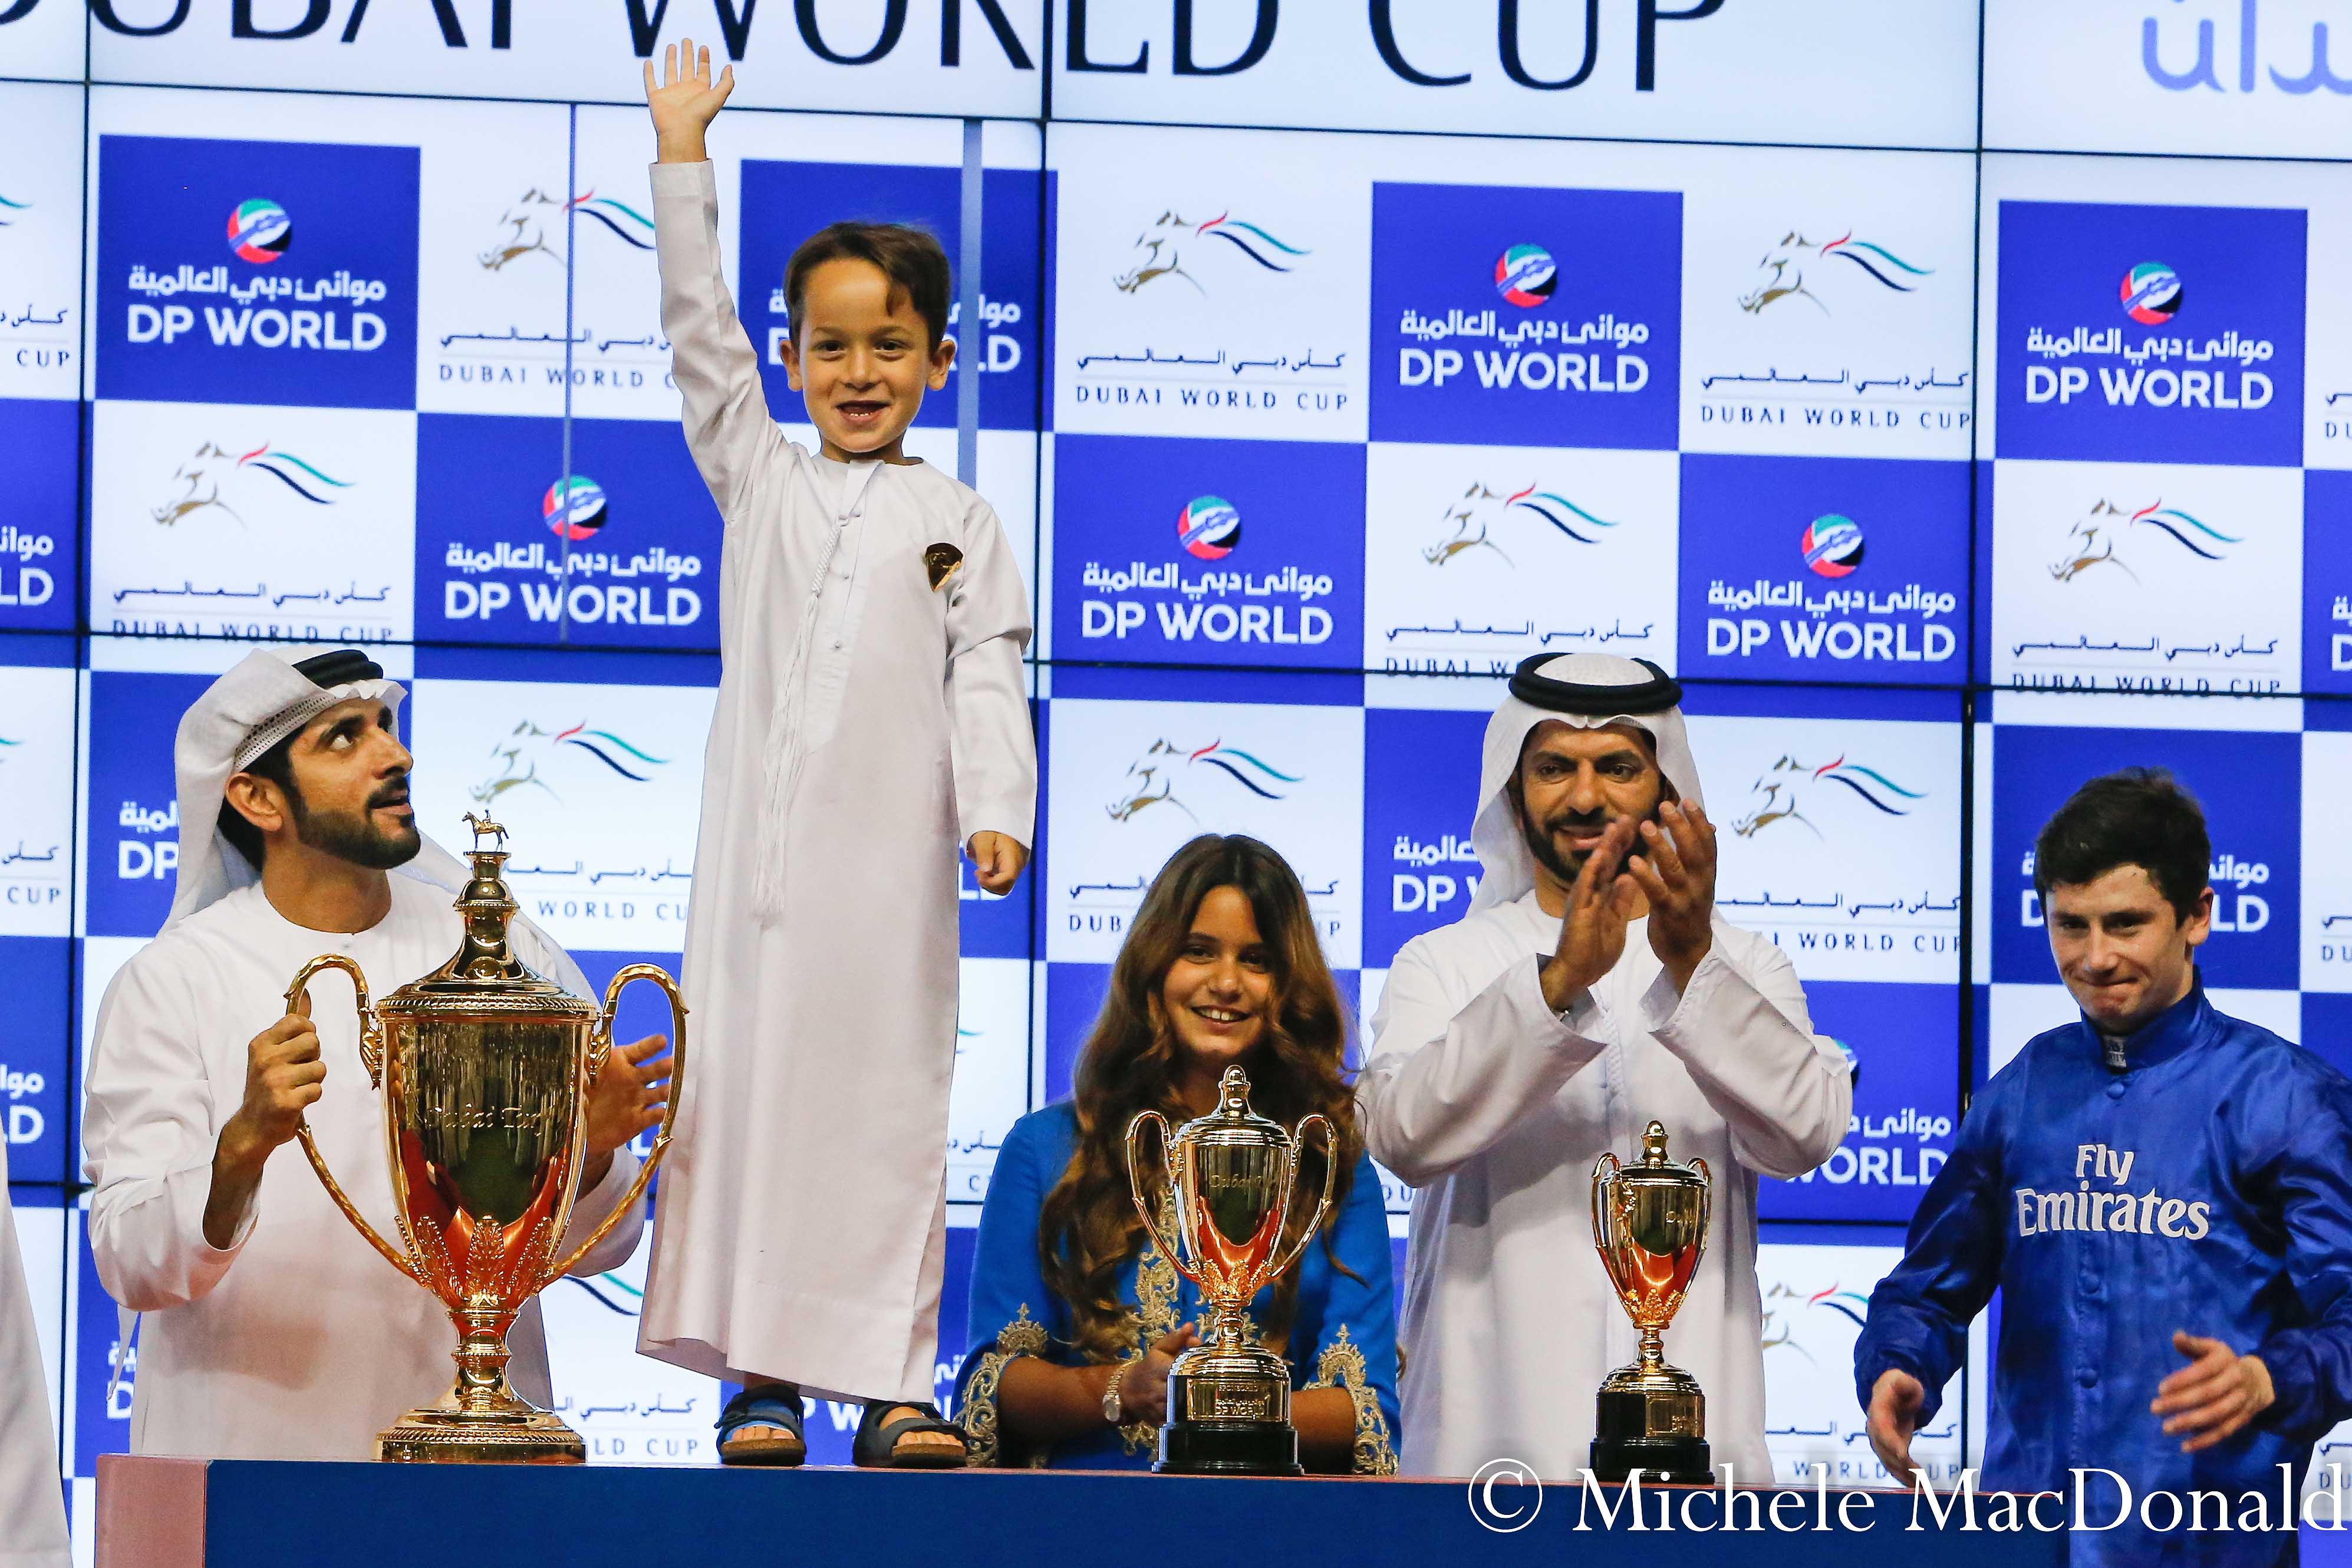 Benbatl’s Dubai Turf was the first of two huge wins on the night for Saeed Bin Suroor’s team. Here with the trophy are Crown Prince Sheikh Hamdan bin Mohammed al Maktoum with the young son of Sheikh Mohammed and Princess Haya, Sheikh Zayed, standing on the table next to their daughter, Al Jalila, and Saeed Bin Suroor and  jockey Oisin Murphy. Photo: Michele MacDonald